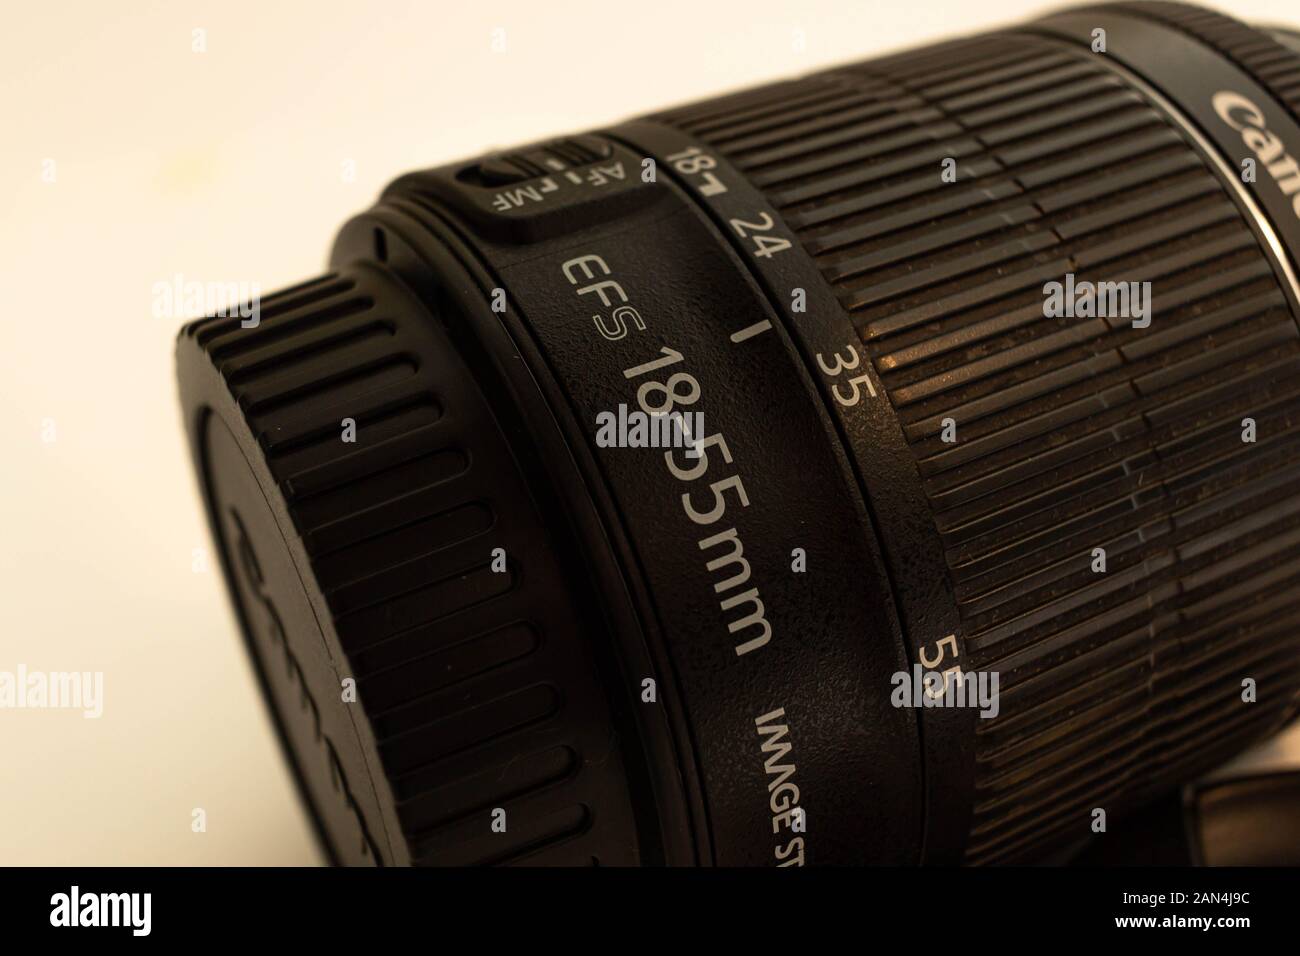 Picture of Canon EF-S 18-55mm f/3.5-5.6 IS STM Stock Photo